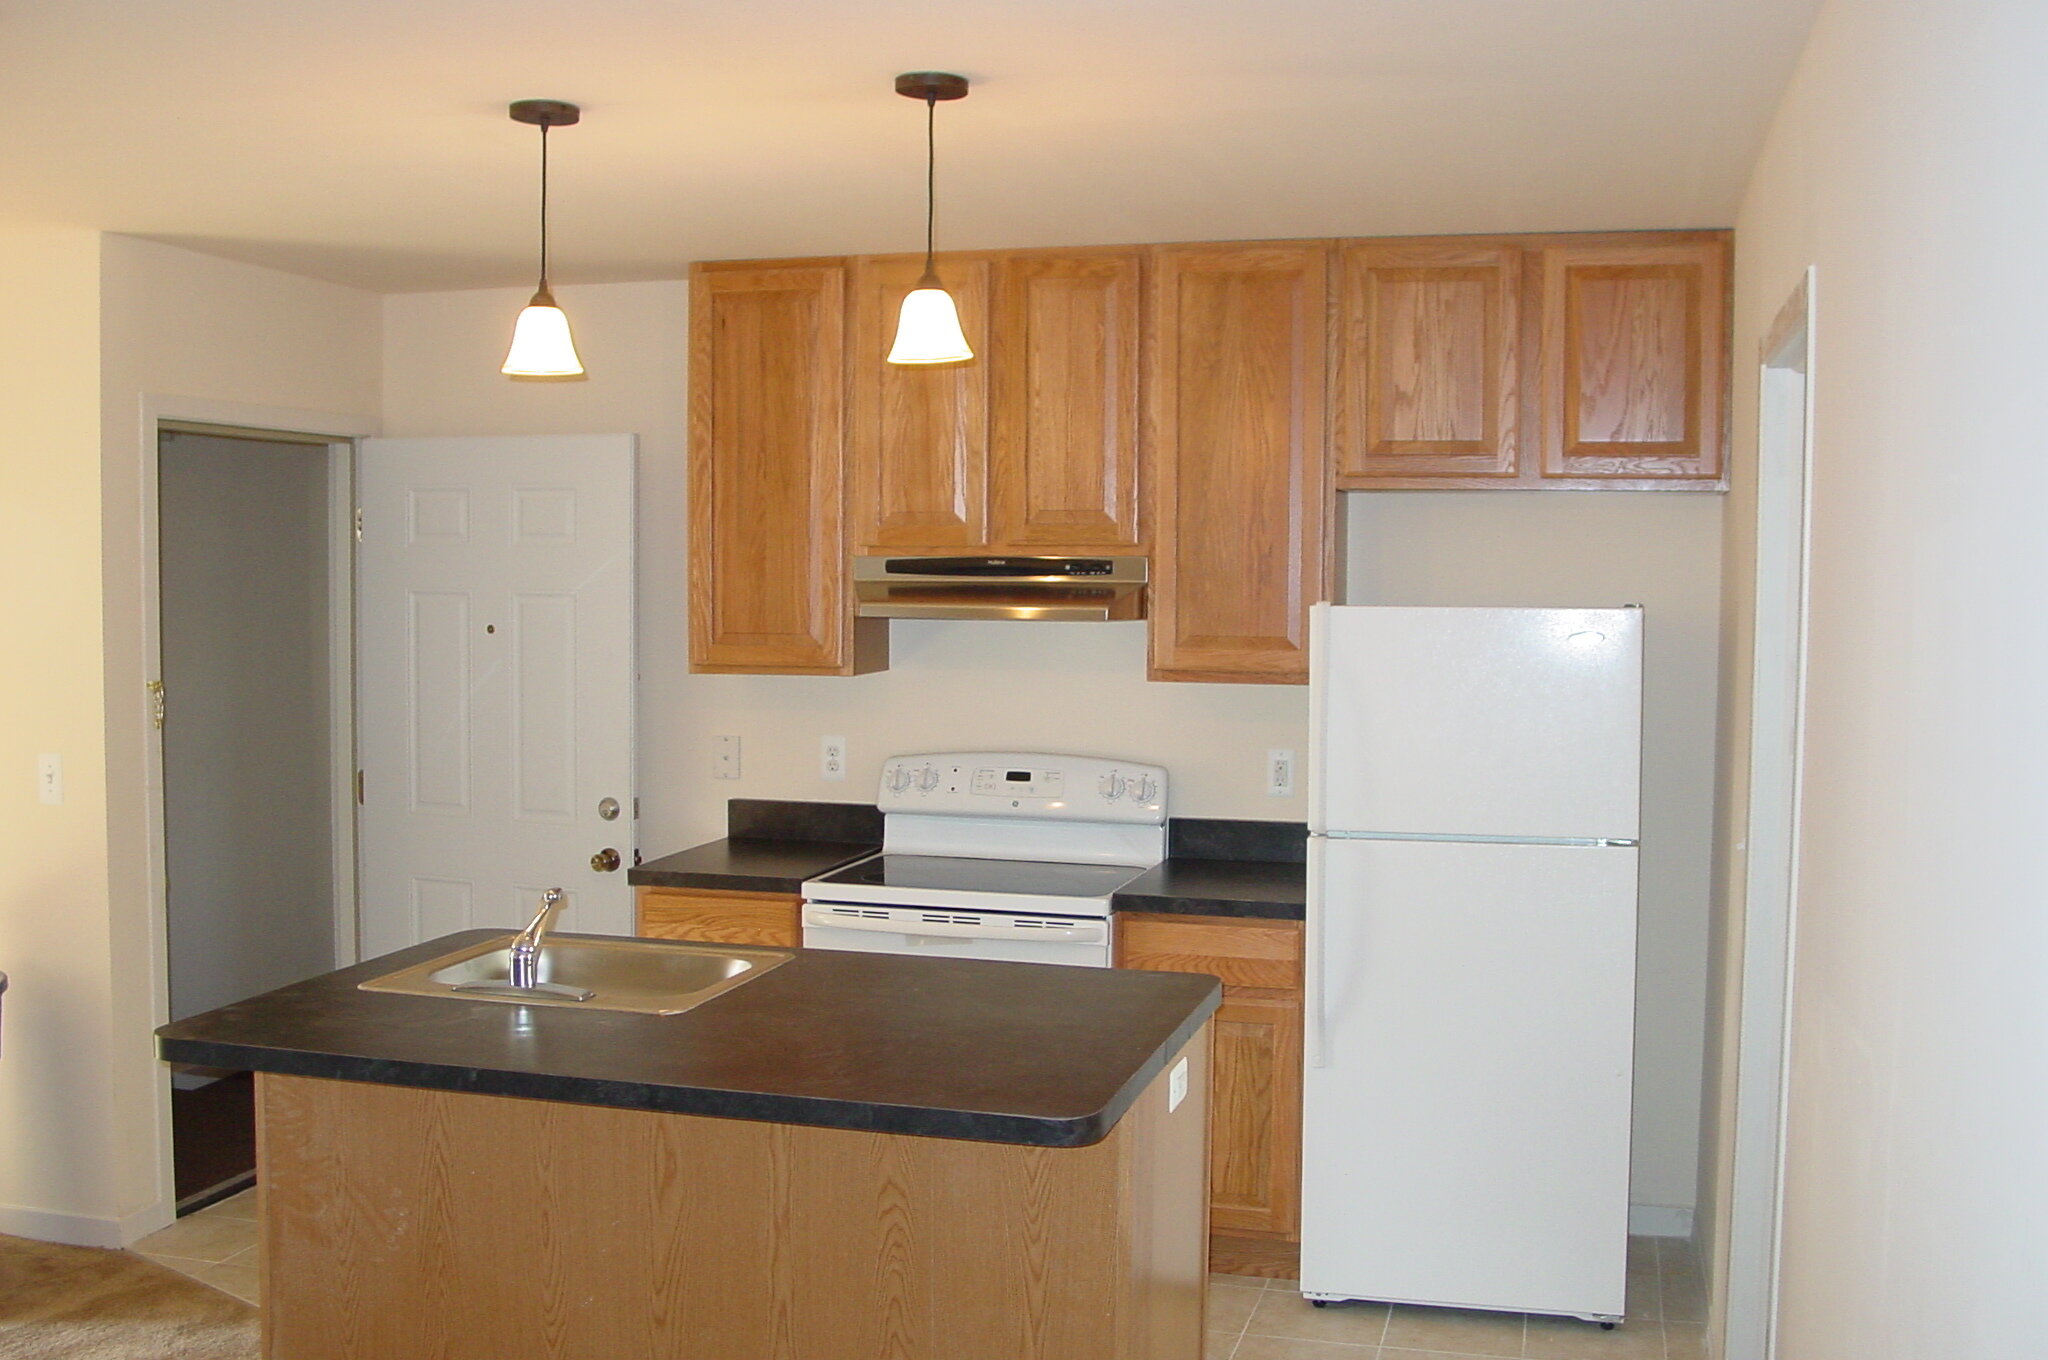 928 S. State Ann Arbor 2 br  #3 - 2BR, 1BA #3 kitchen and entry.JPG